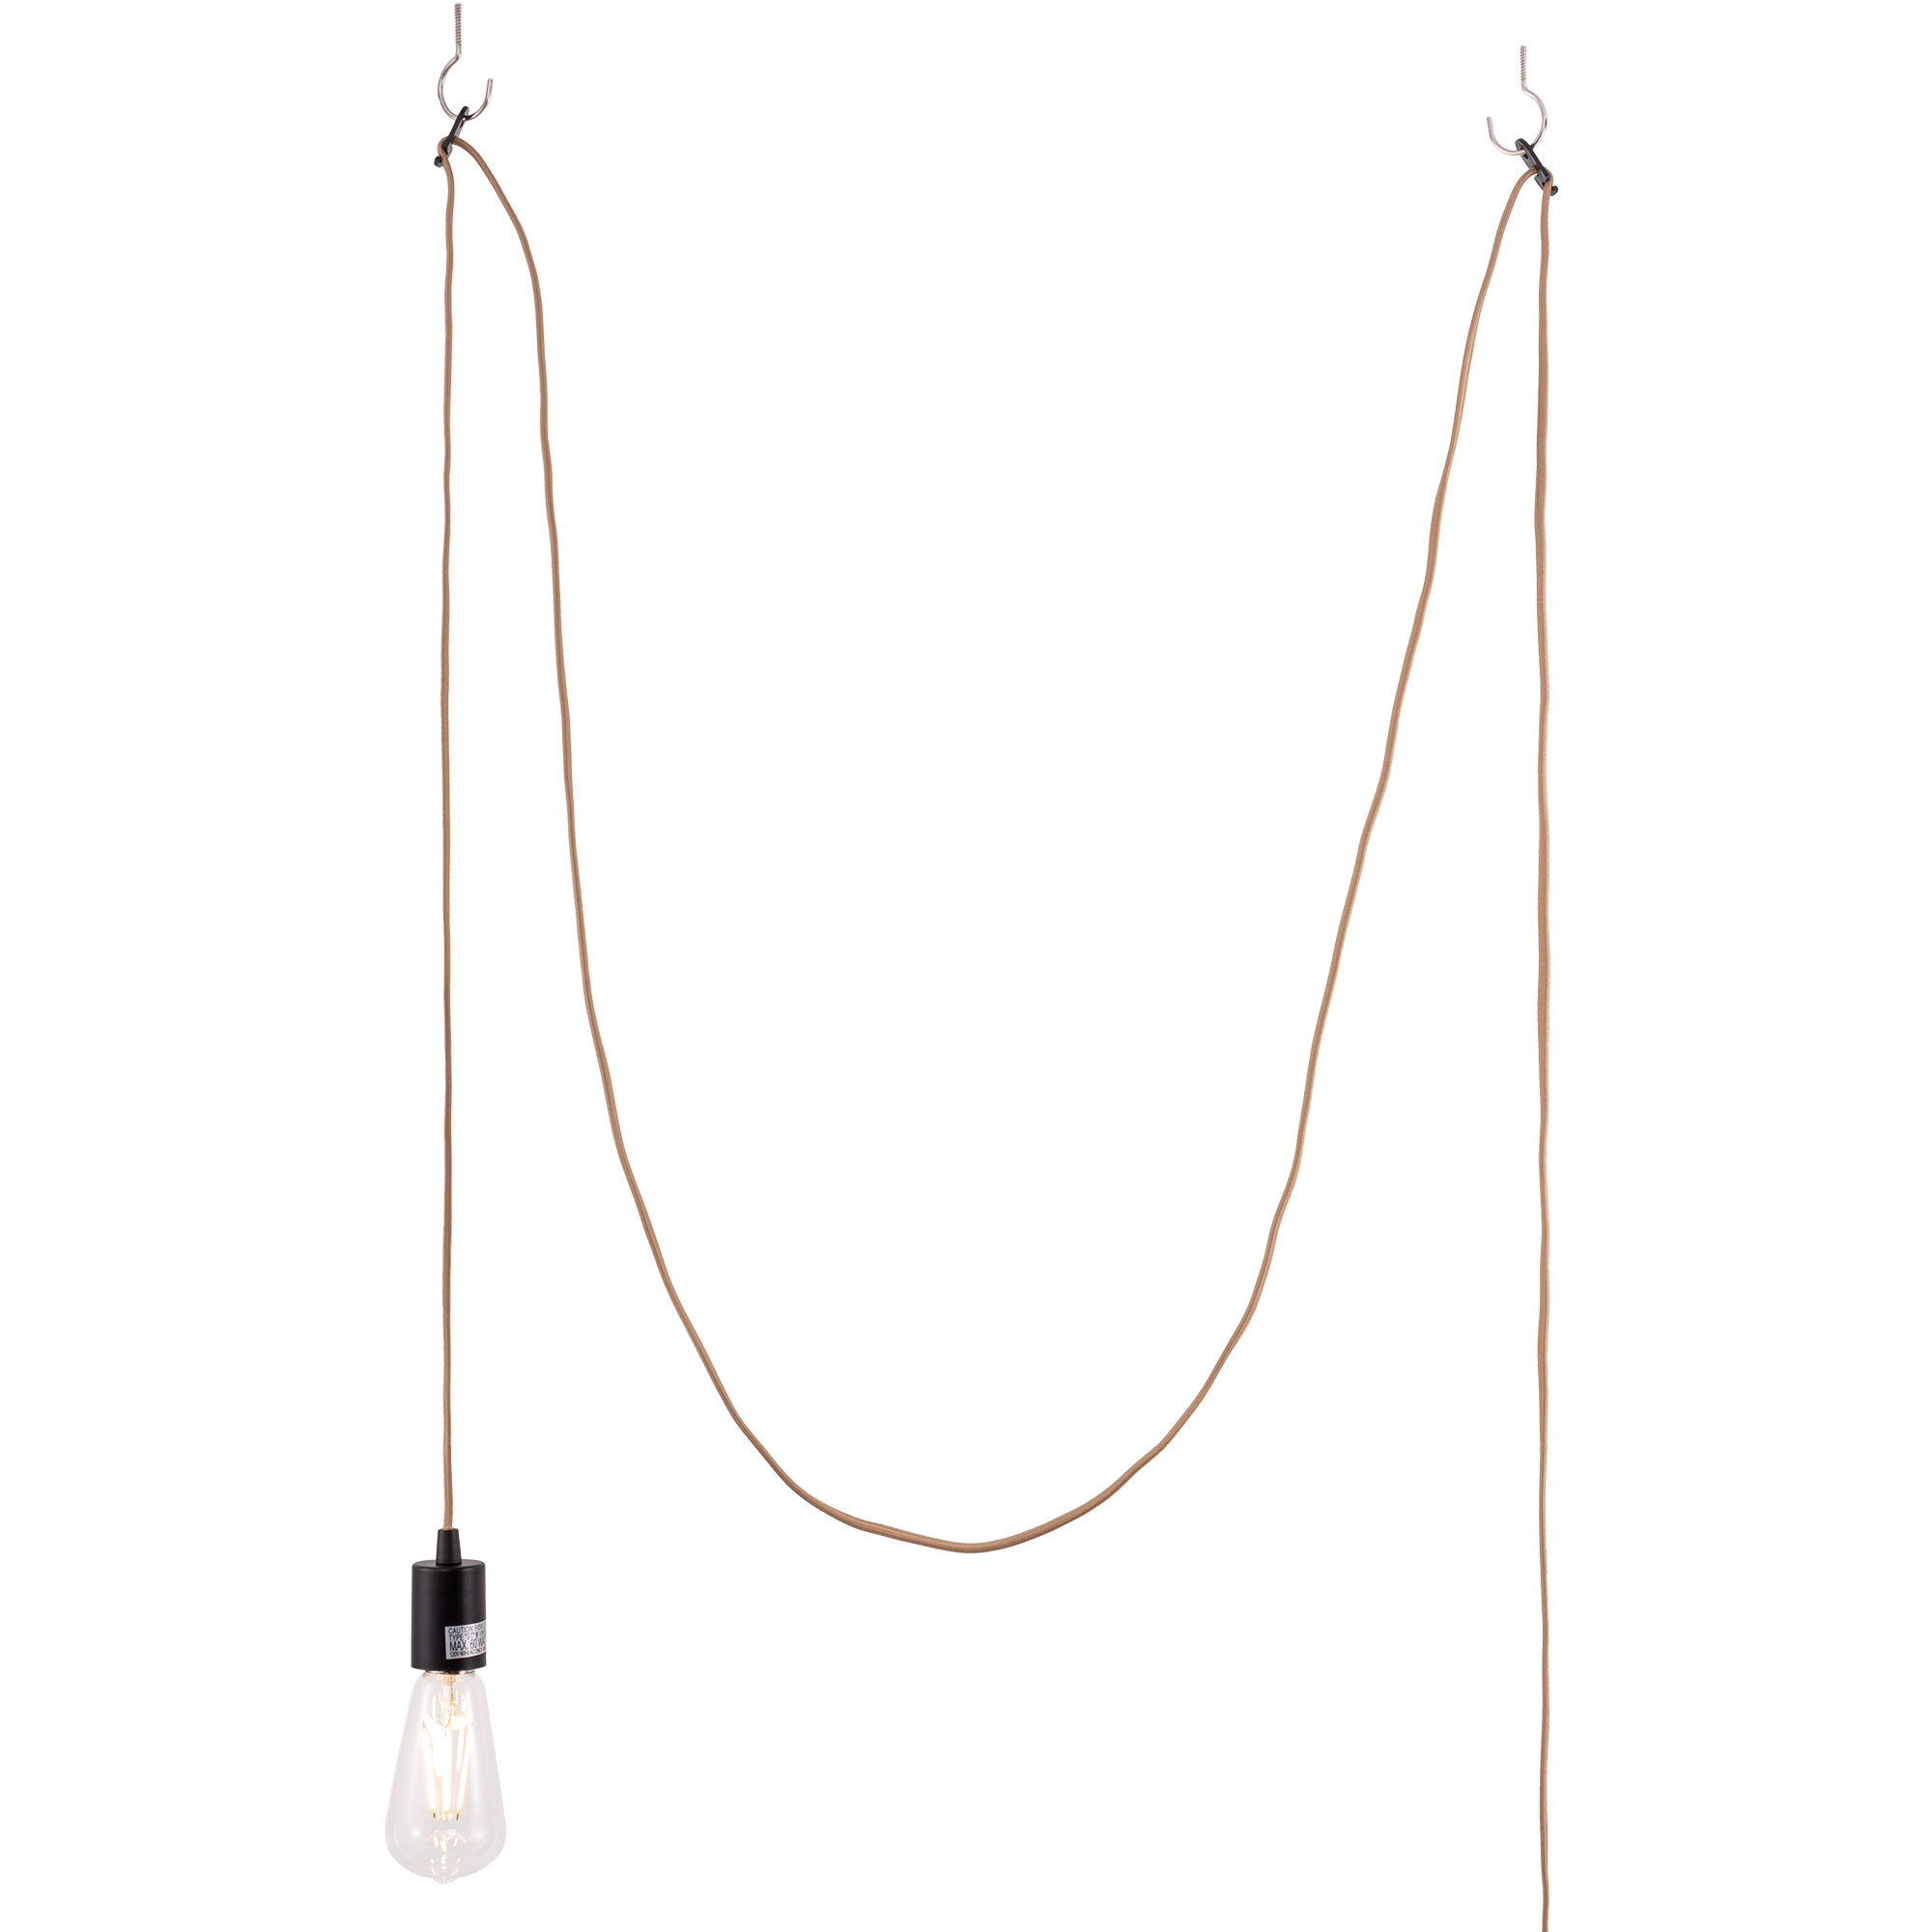 Gruenlich Plug in Pendant Lighting, Hanging Light Kits with ON/Off Switch, 15 Feet Cord, Bulbs Not Included (Bronze, 3-Pack)